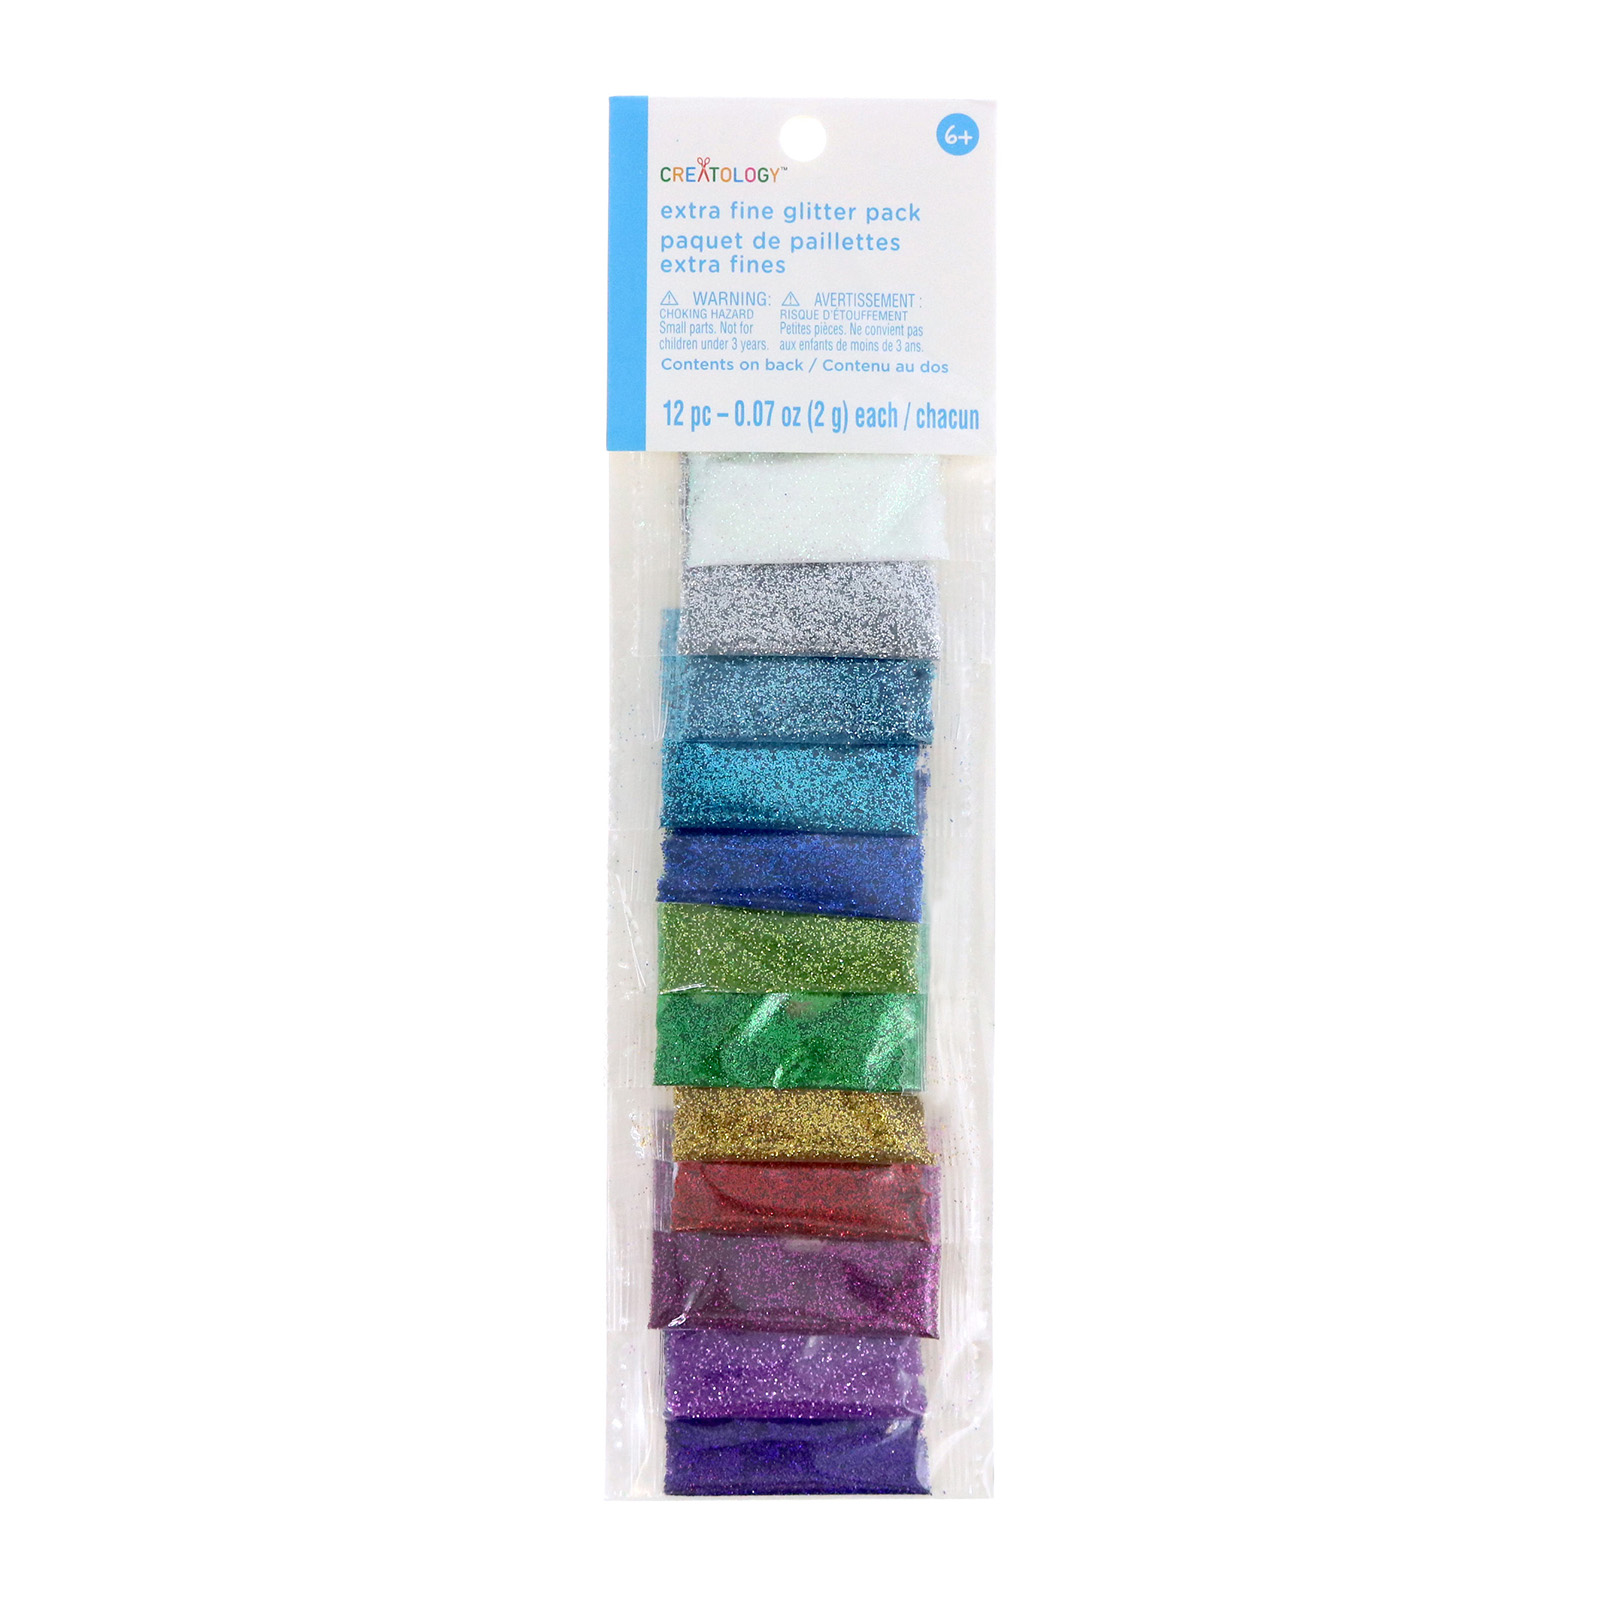 12 Packs: 12 ct. (144 total) Rainbow Extra Fine Glitter Pack by Creatology™